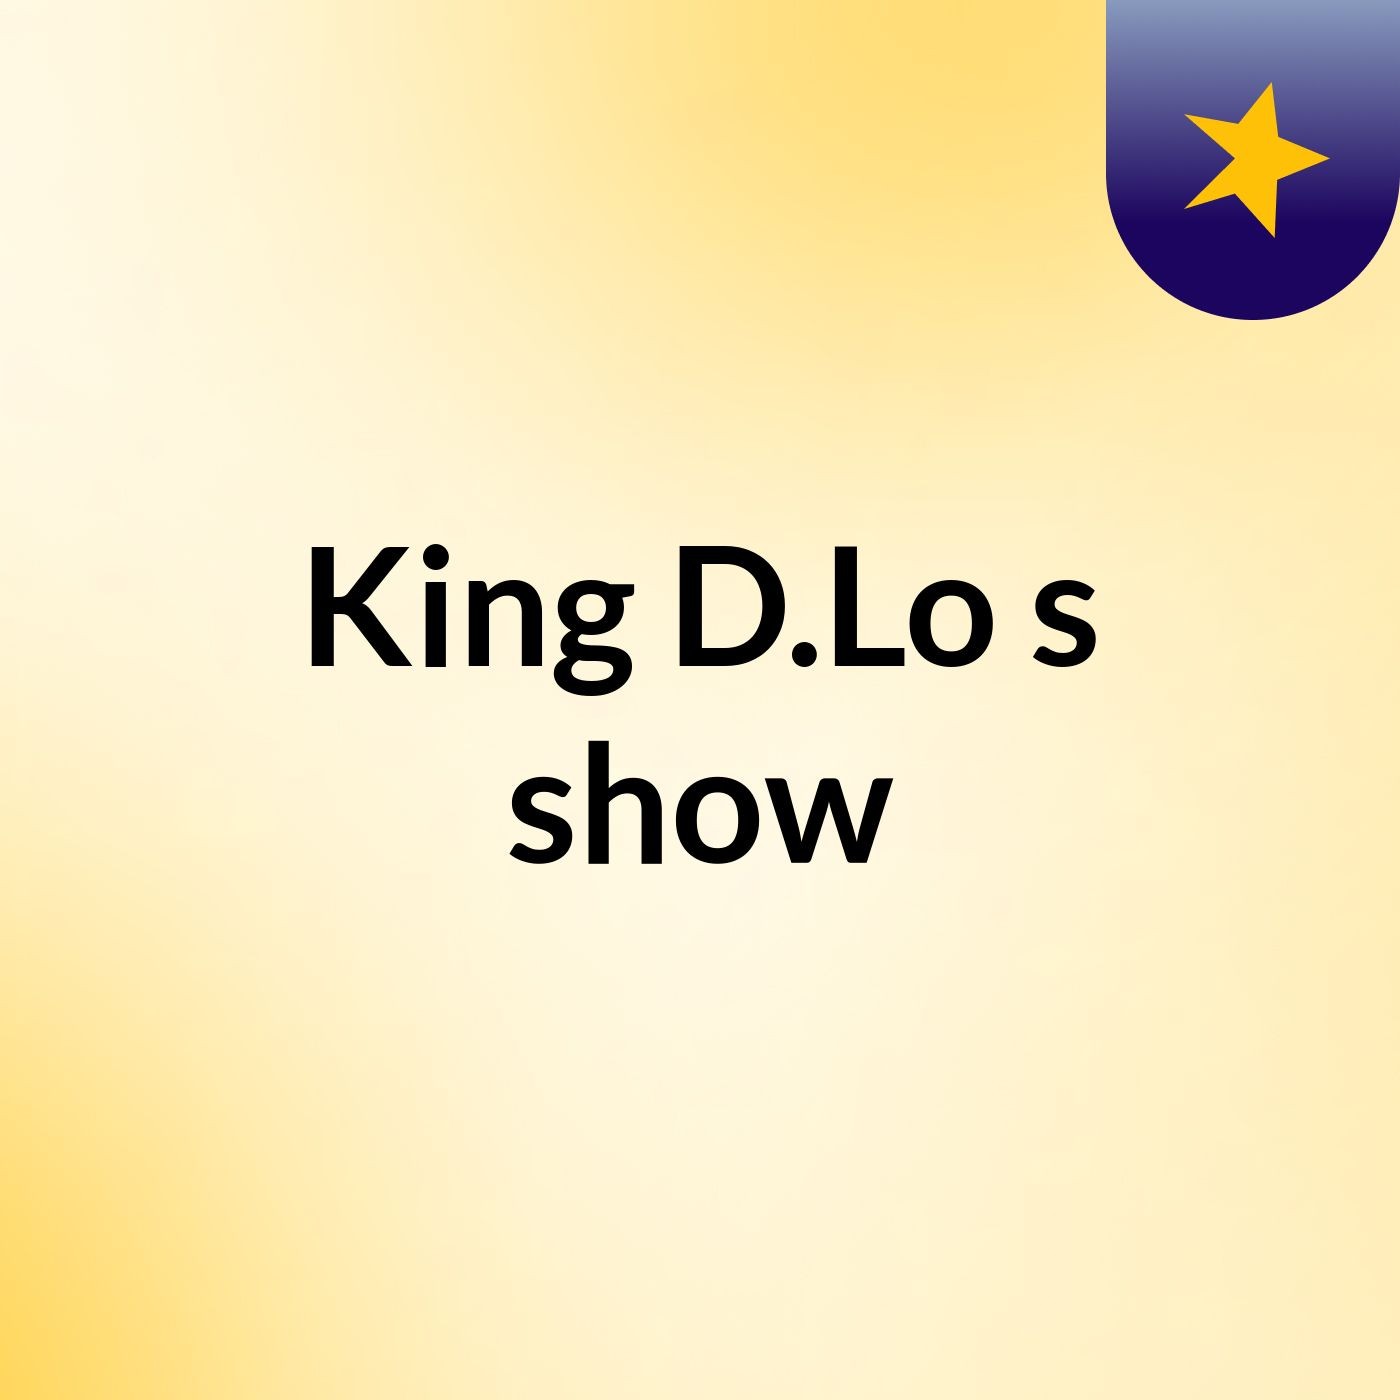 King D.Lo's show